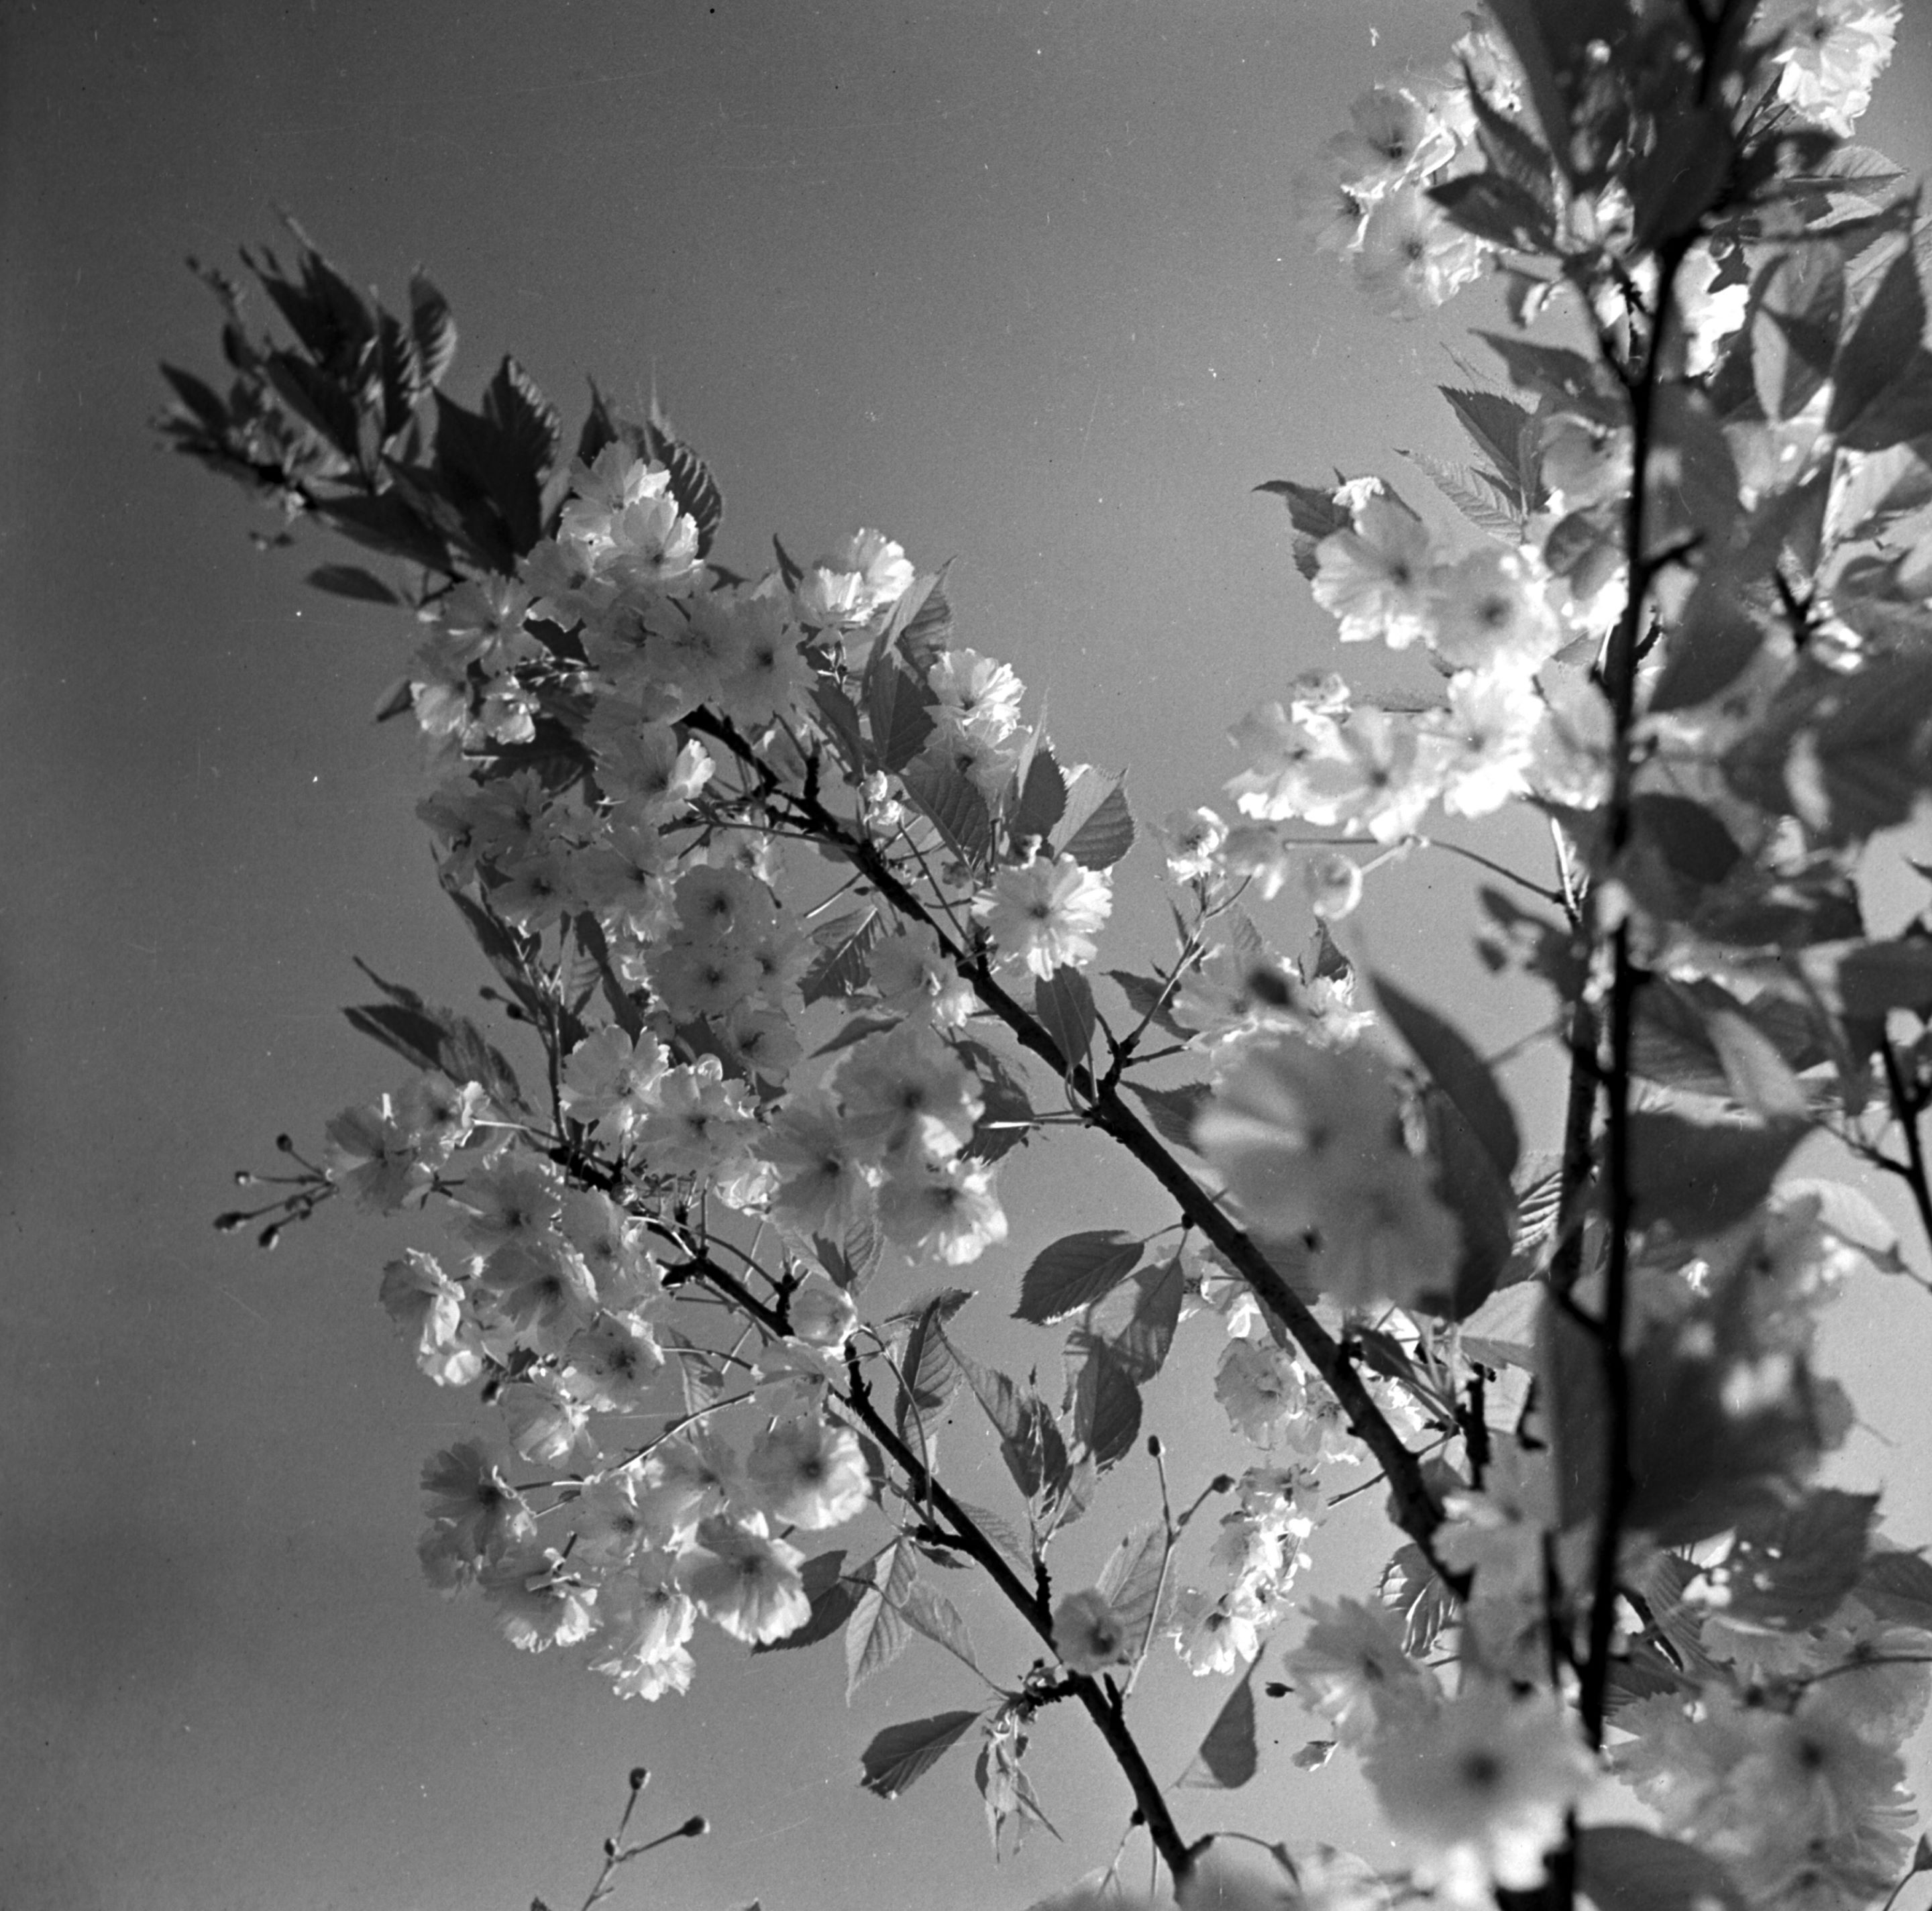 Spring blossom in full bloom. From the Bertram Unné photographic collection.